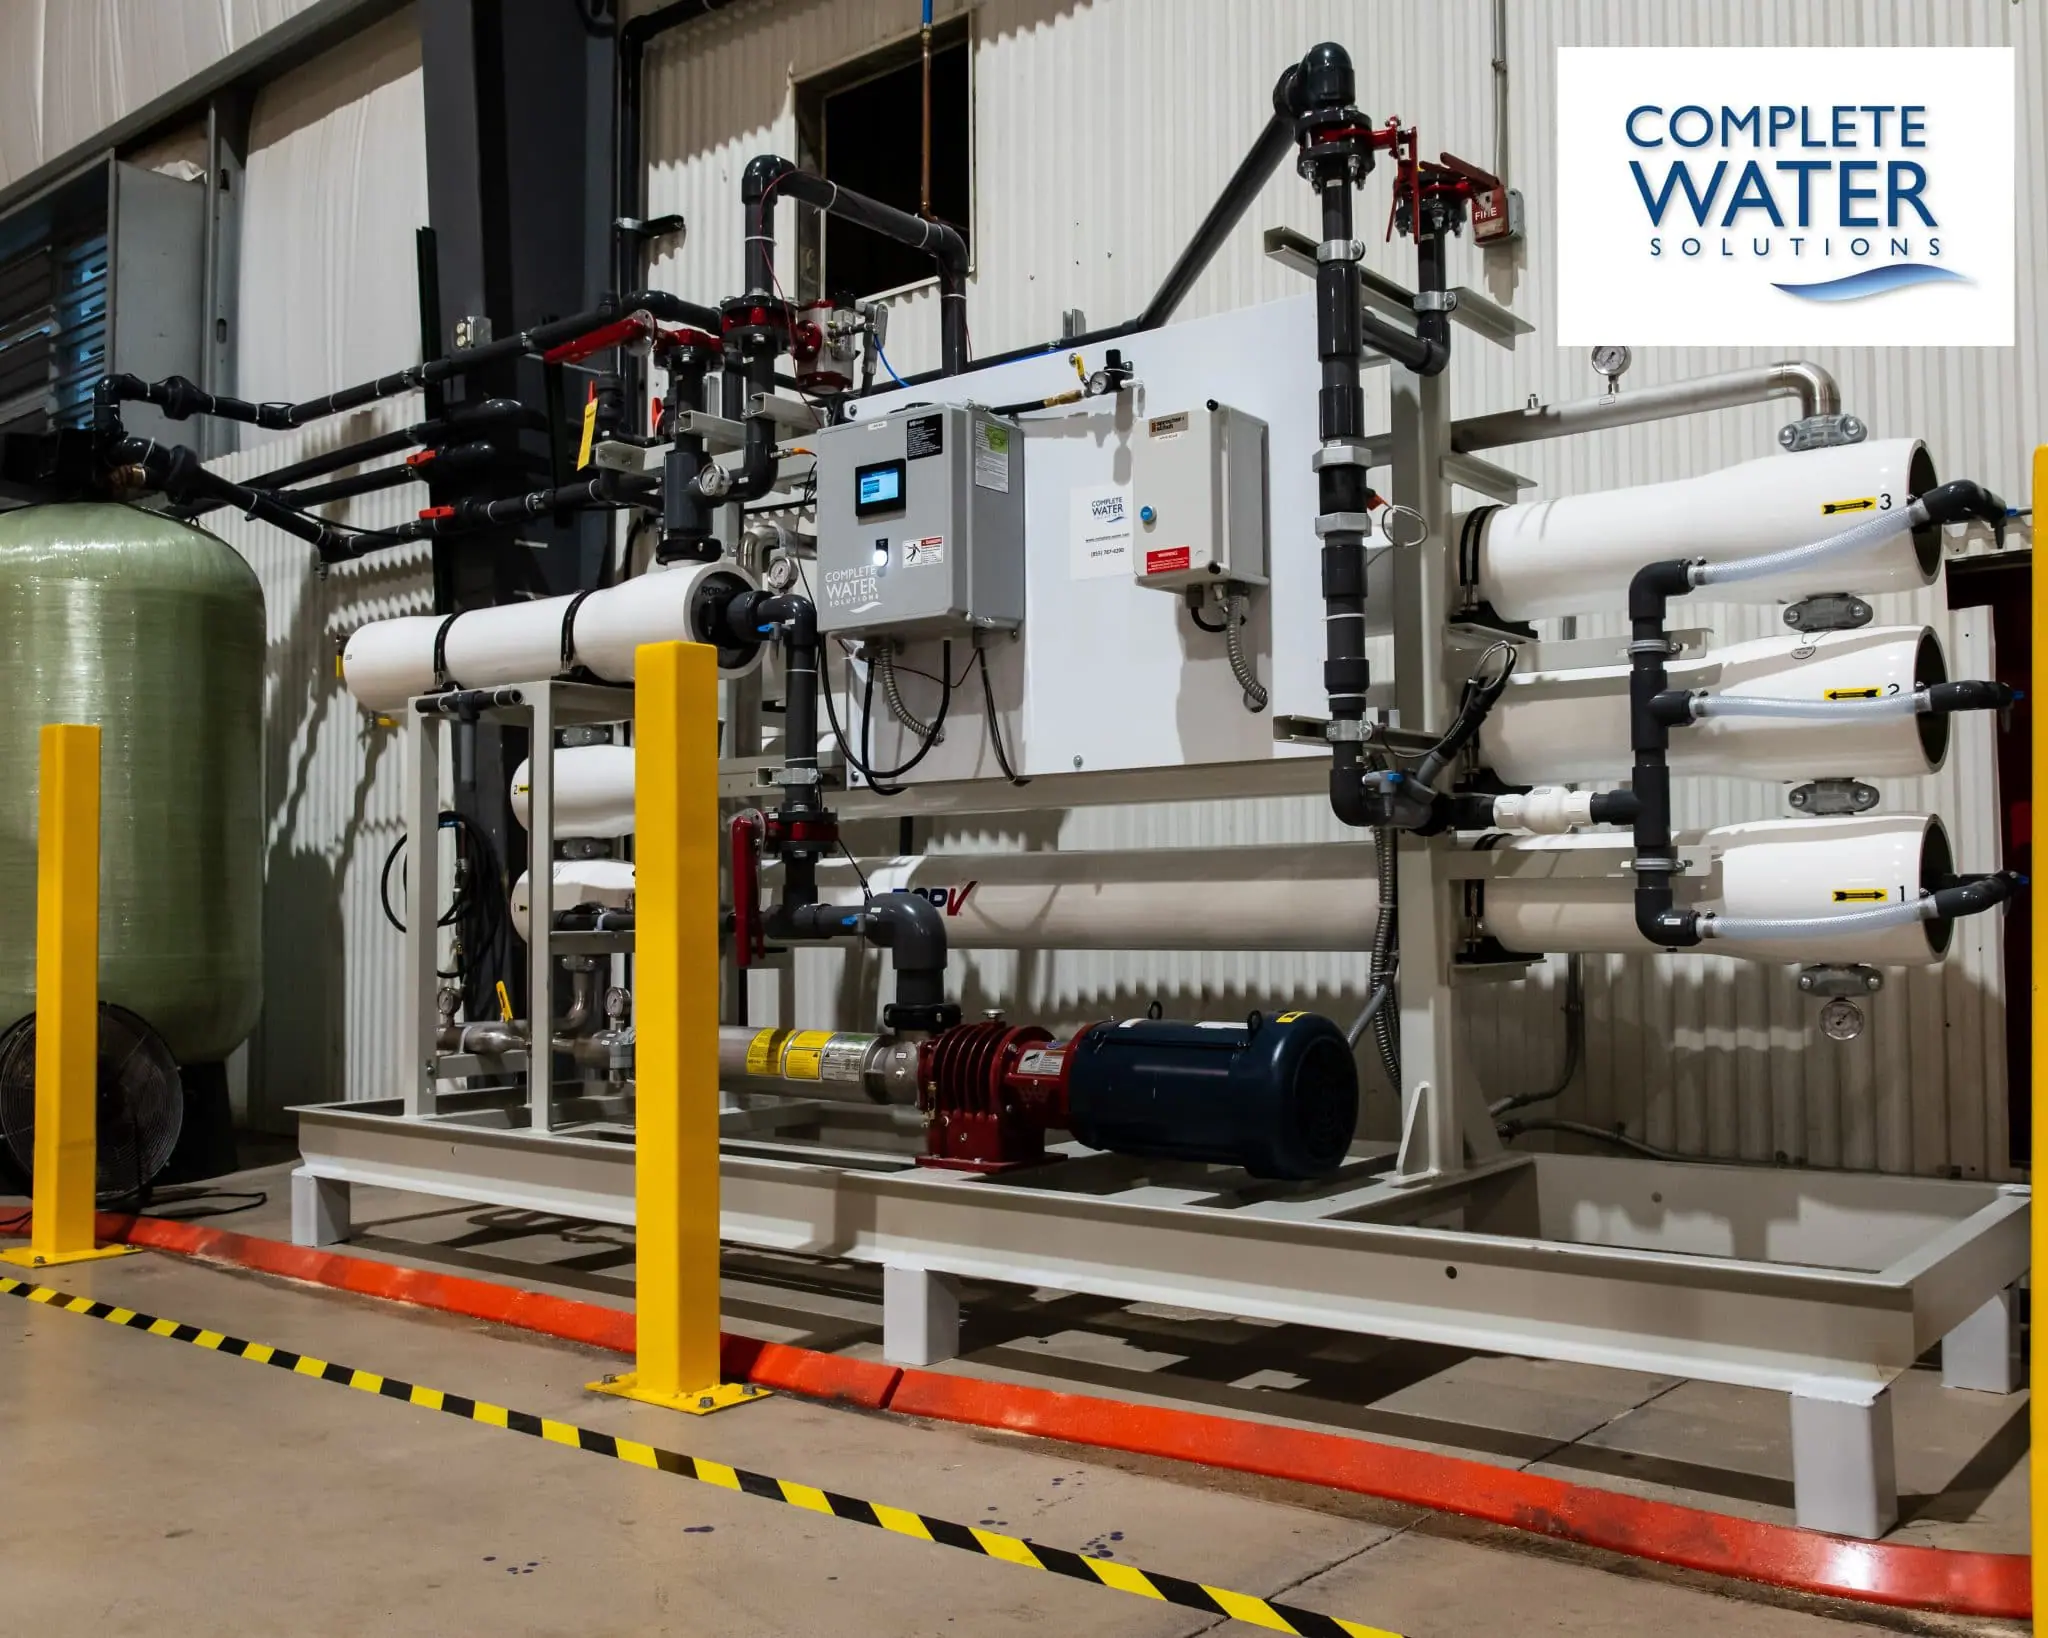 industrial ro system maintenance wisconsin, wisconsin industrial ro system maintenance, ro system maintenance complete water